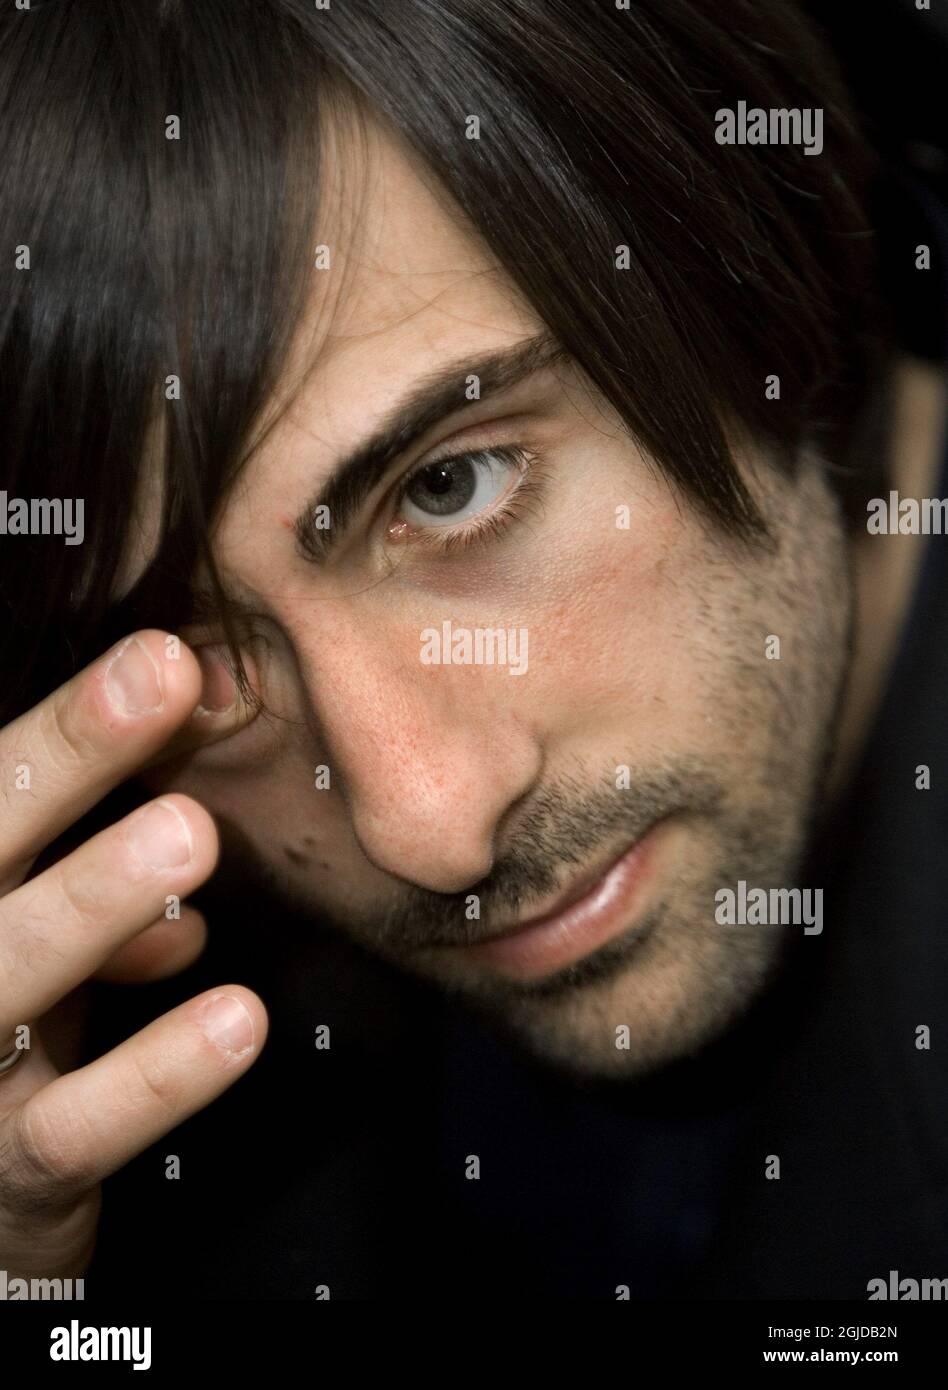 Actor Jason Schwartzman during a photocall at the Stockholm Film Festival to promote the film 'The Darjeeling Limited'. Stock Photo